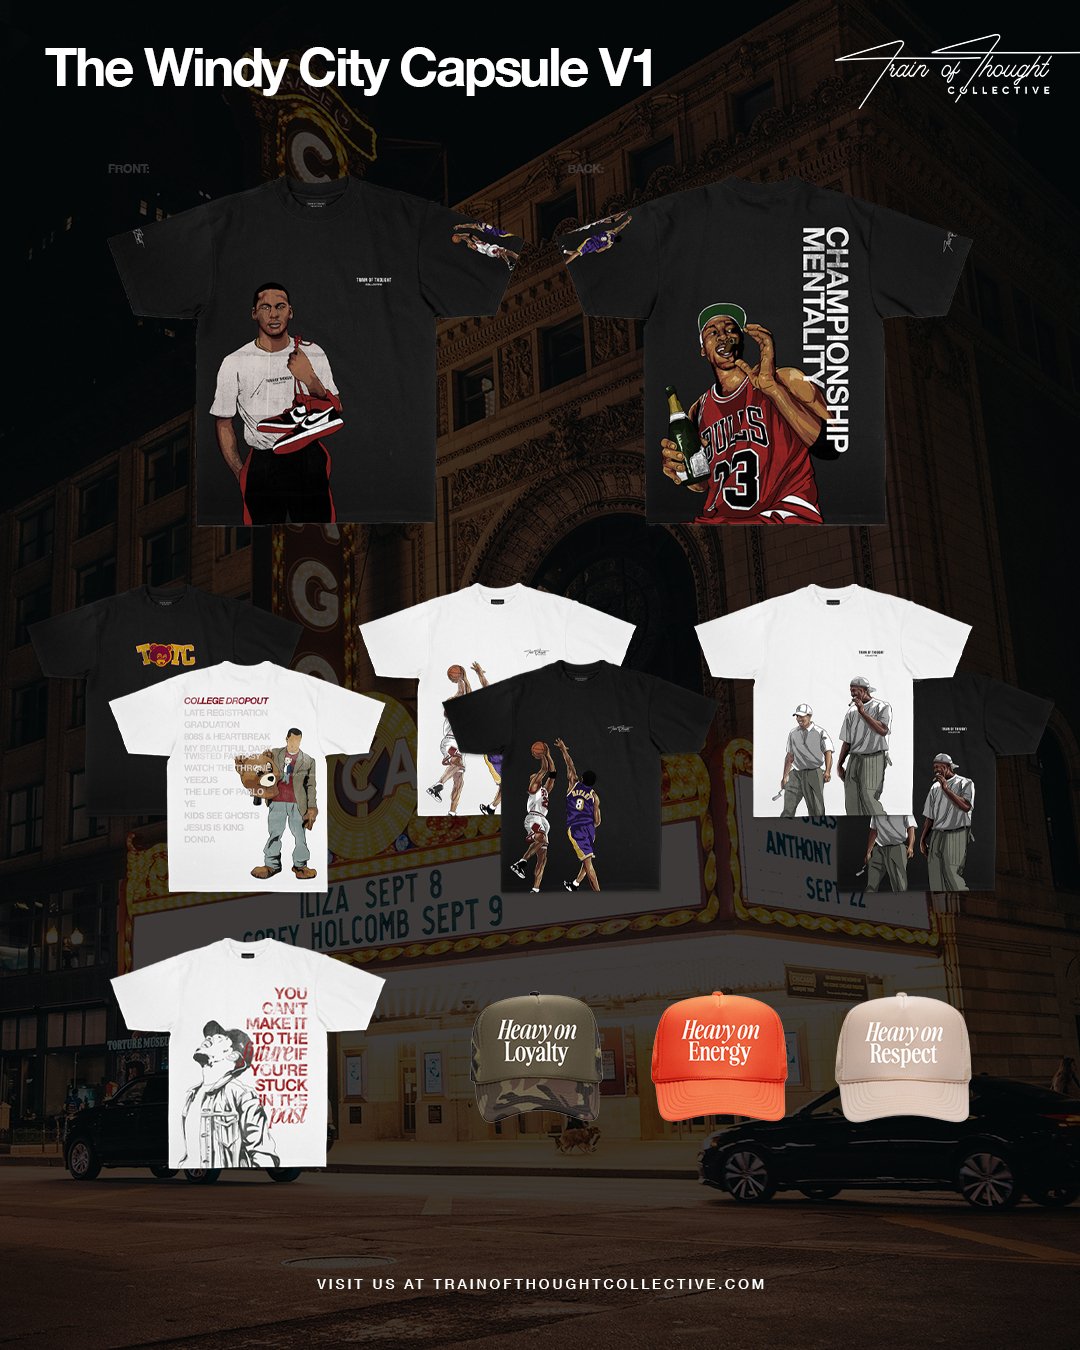 The Windy City Capsule V1 - trainofthoughtcollective